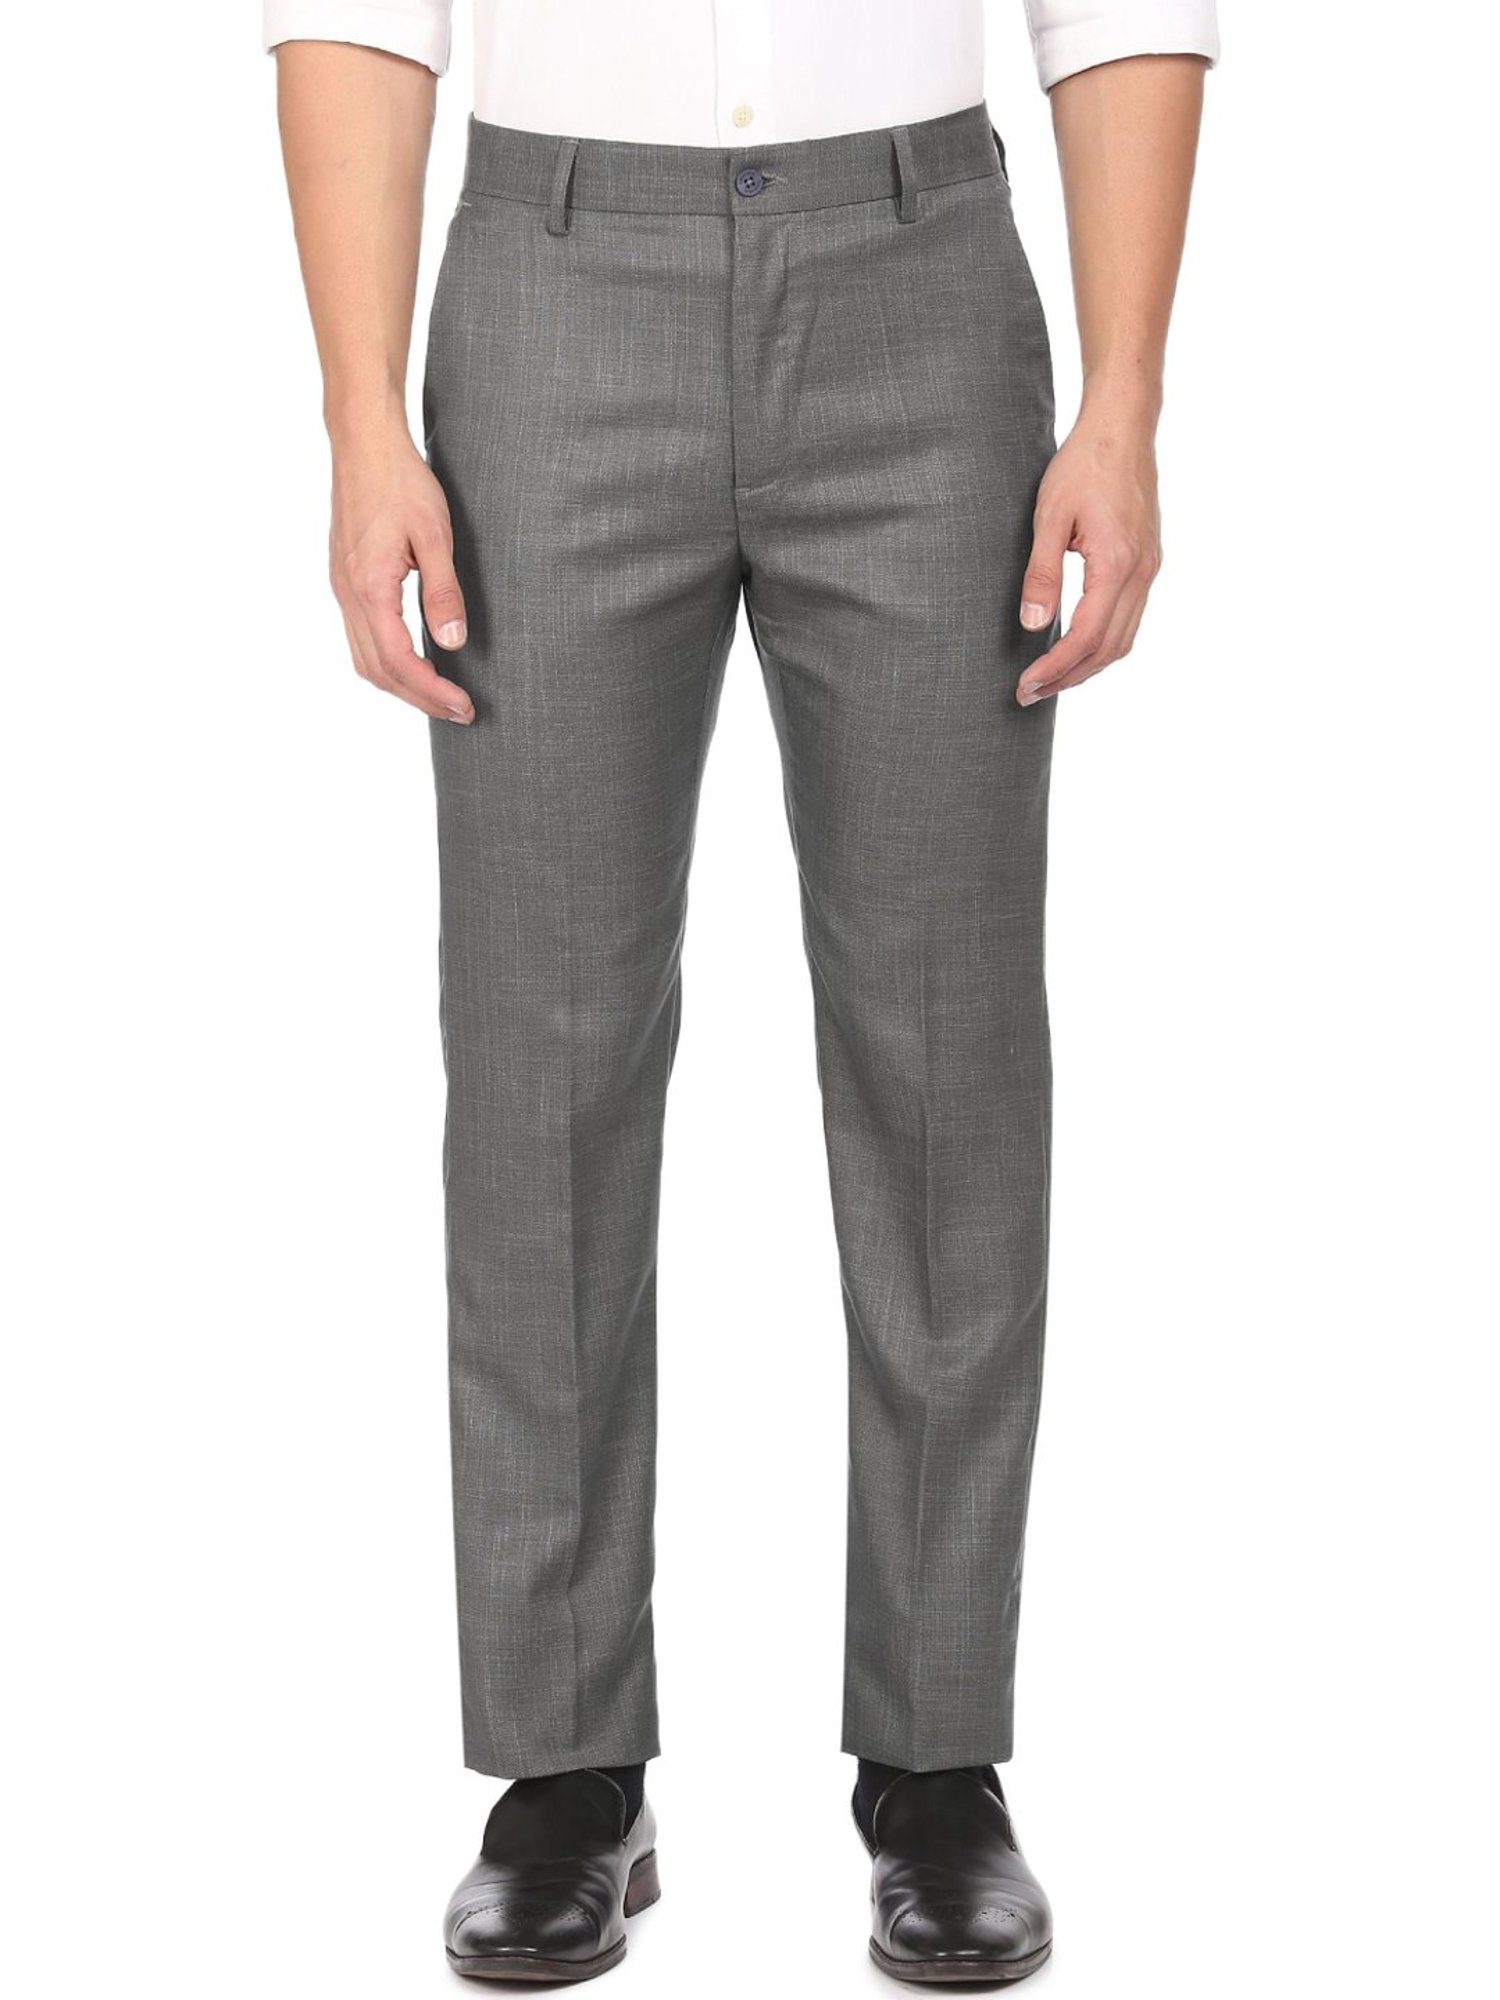 Excalibur Formal Trousers  Buy Excalibur Slim Fit Flat Front Trousers  Online  Nykaa Fashion